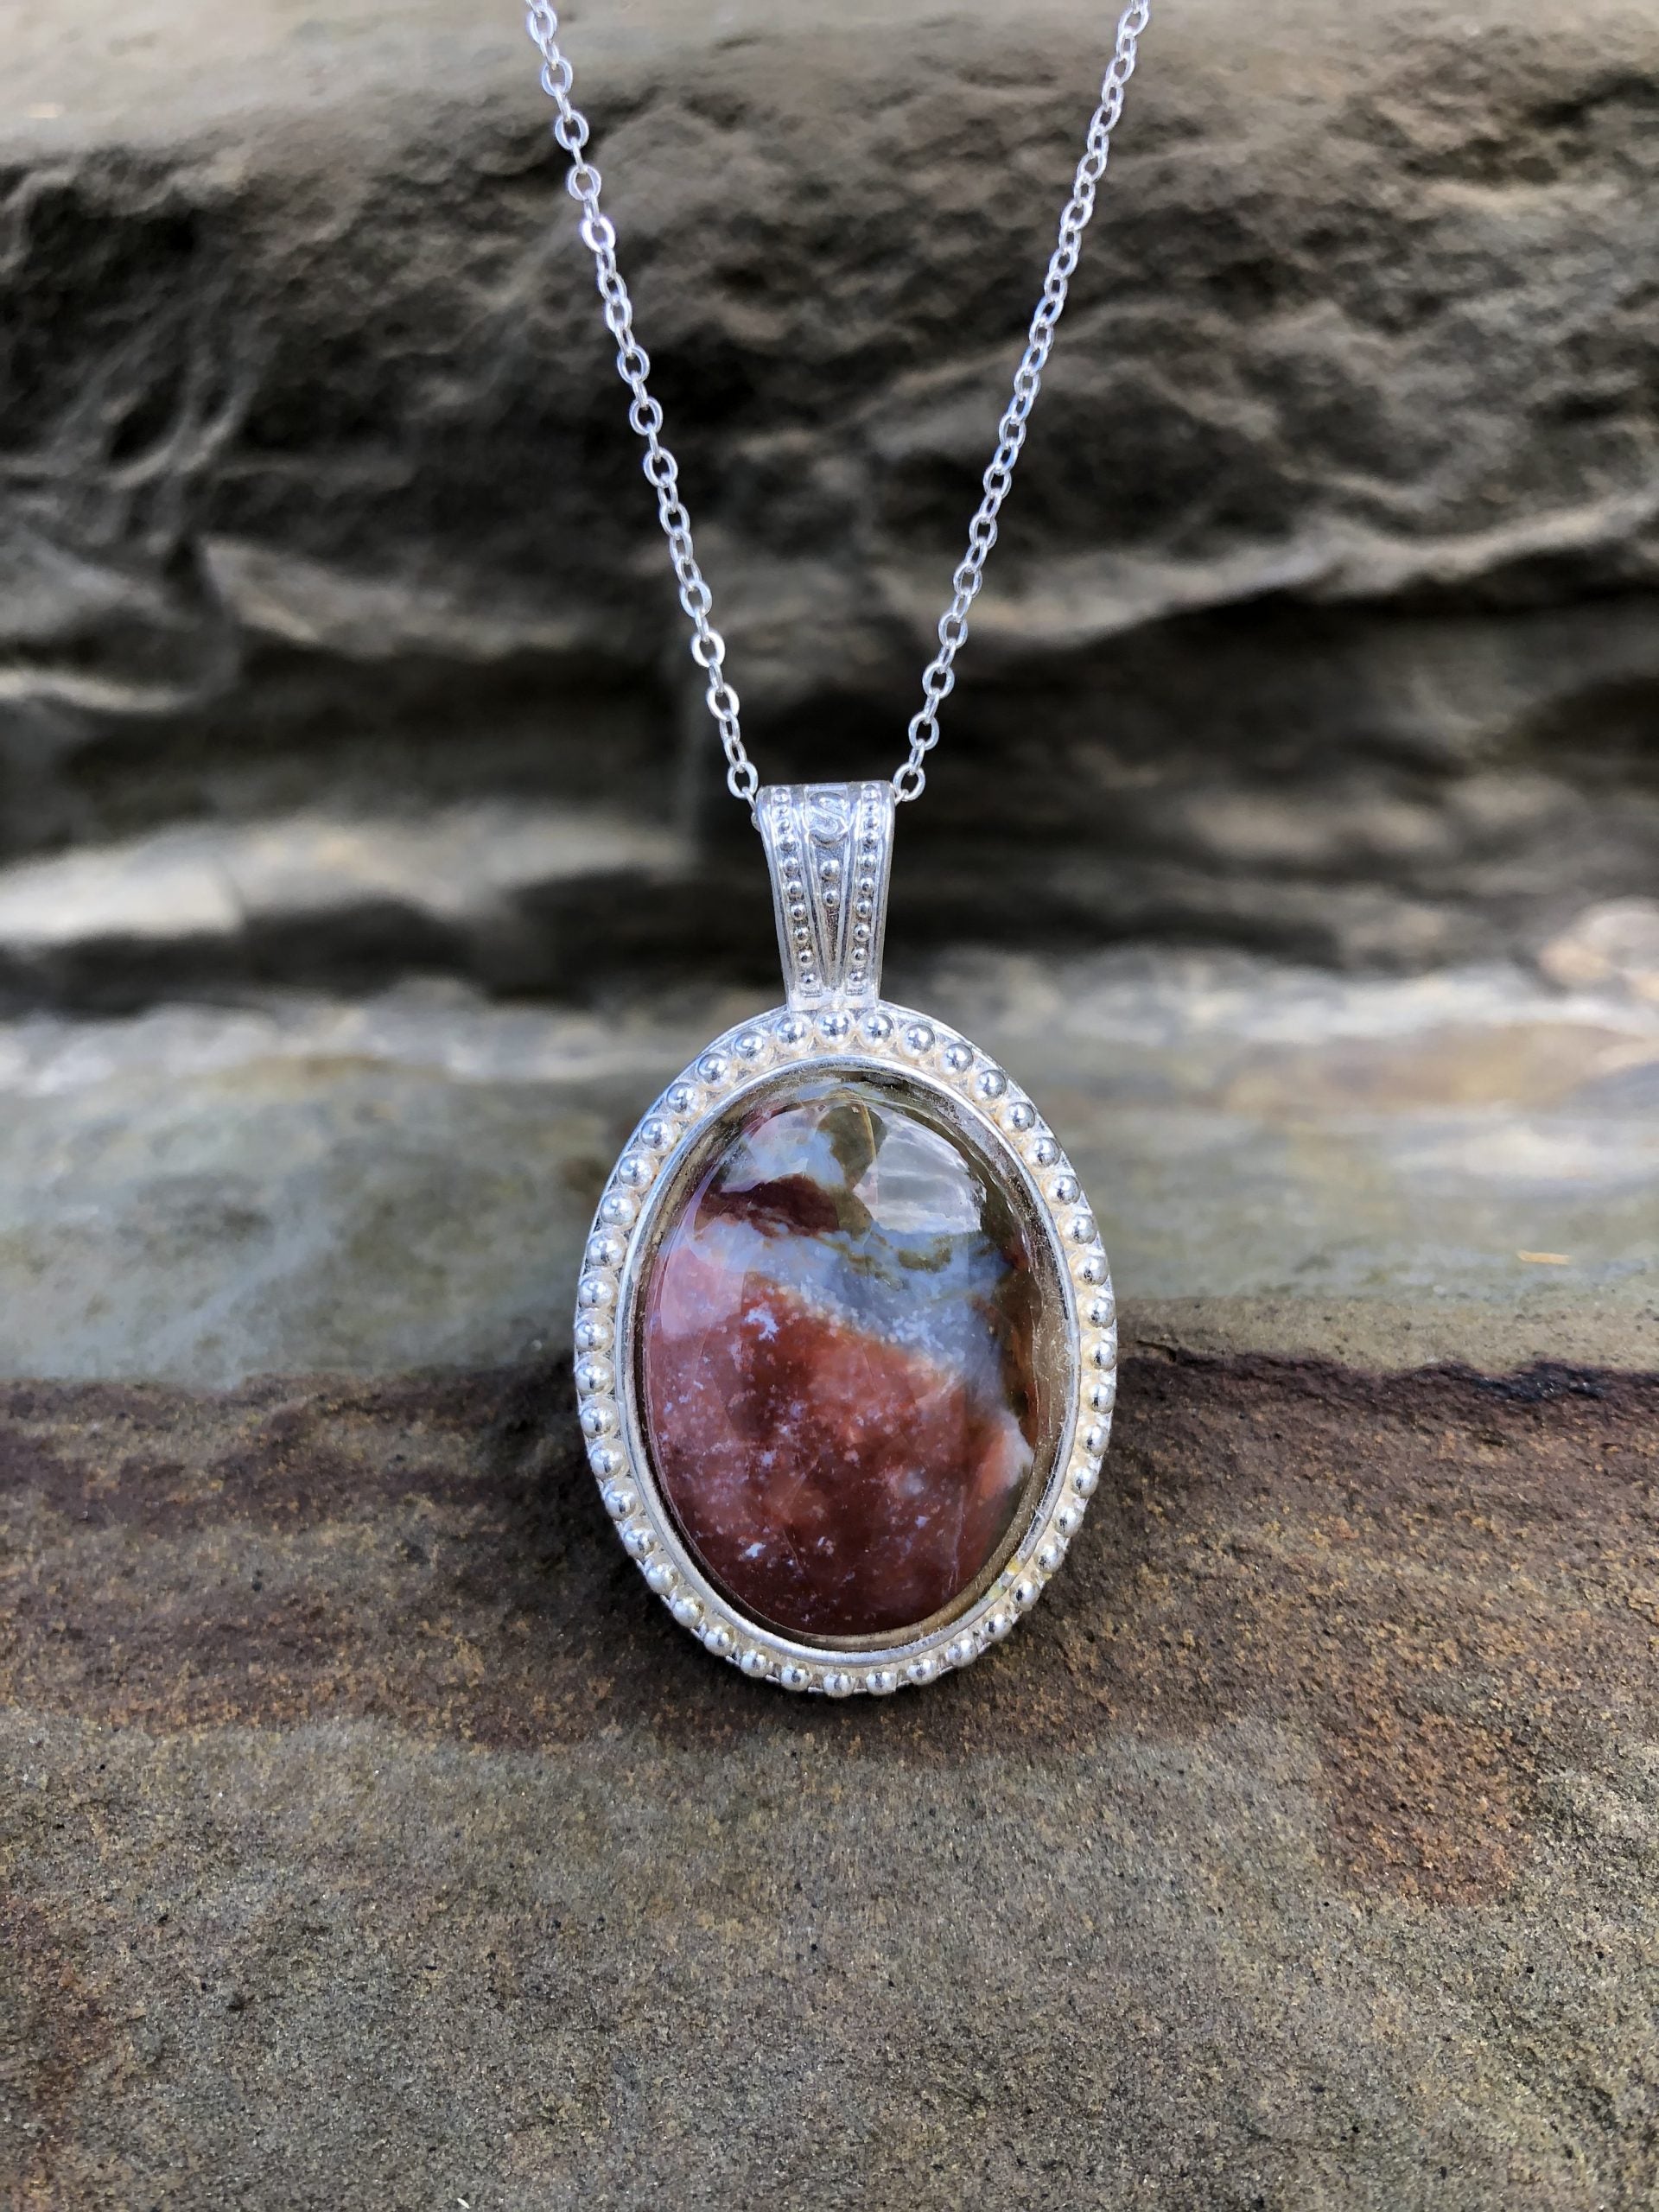 Necklace with a natural jasper-agate from the Hotoritori stream in the Kauranga valley with red, white and brown, hand polished to a 25x18mm cabochon and set in a silver plated setting with 19 inch chain, on stone